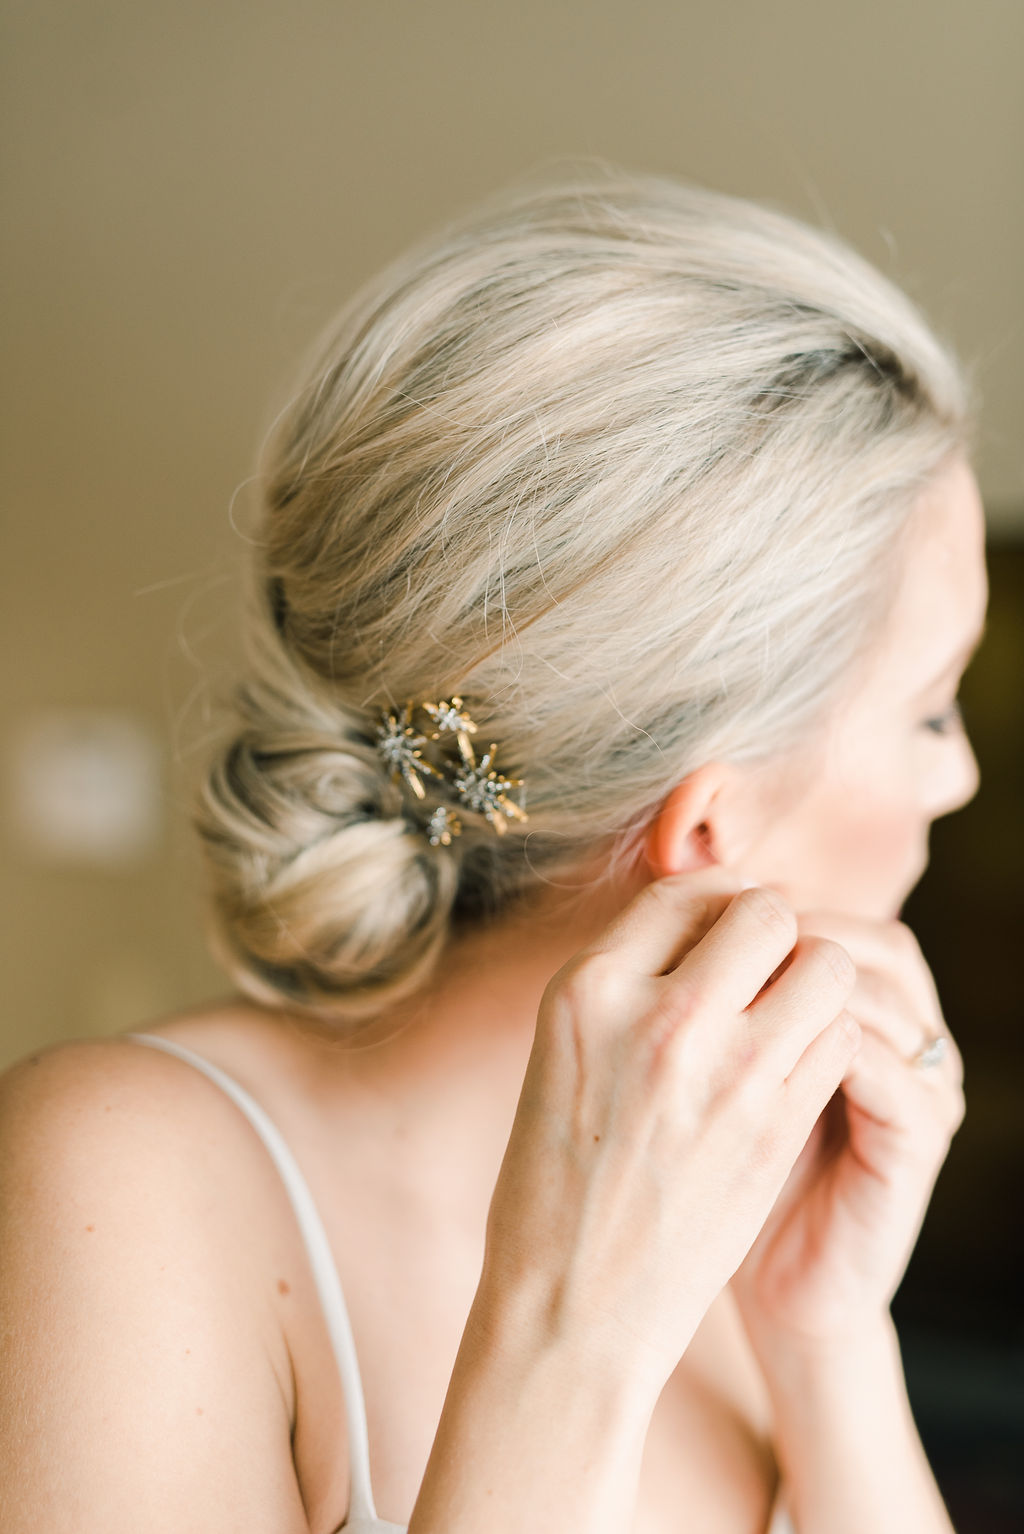 Bride getting ready for wedding day, putting on earrings, hair styled in an elegant updo, winter wedding inspiration. 